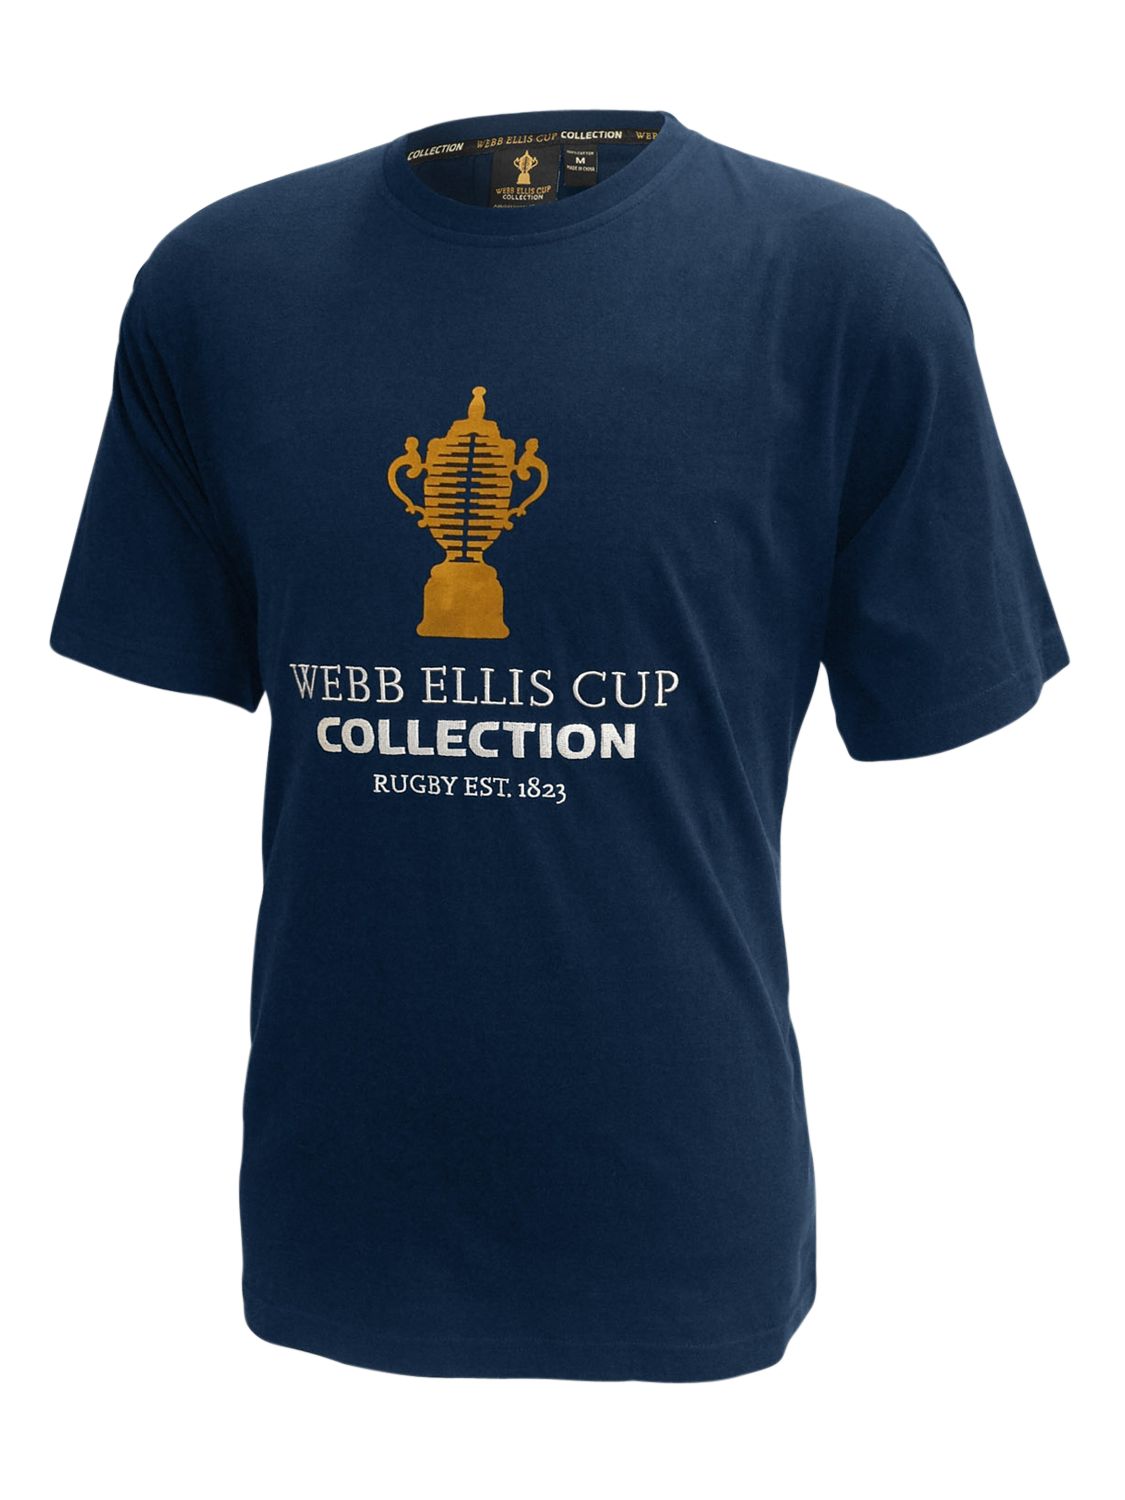 Rugby World Cup Webb Ellis Cup T-Shirt, Navy